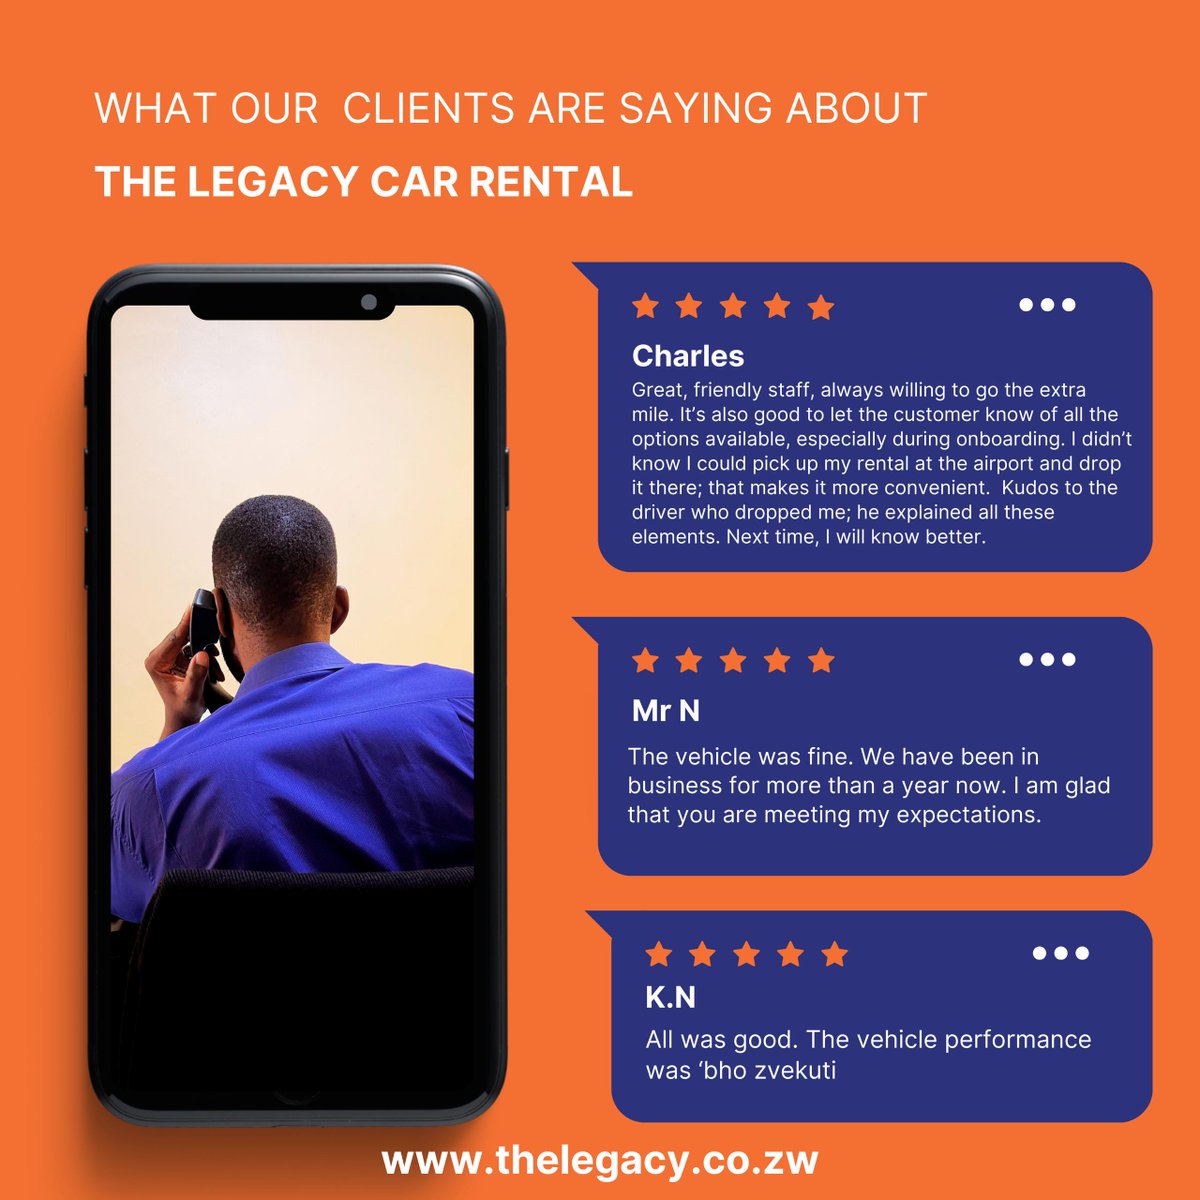 Every testimonial is a story of partnership and progress. ✍️❤️ Discover how together, we create the unimaginable!
#TheLegacy #travelwithus #customerreview #customercare #happyclient